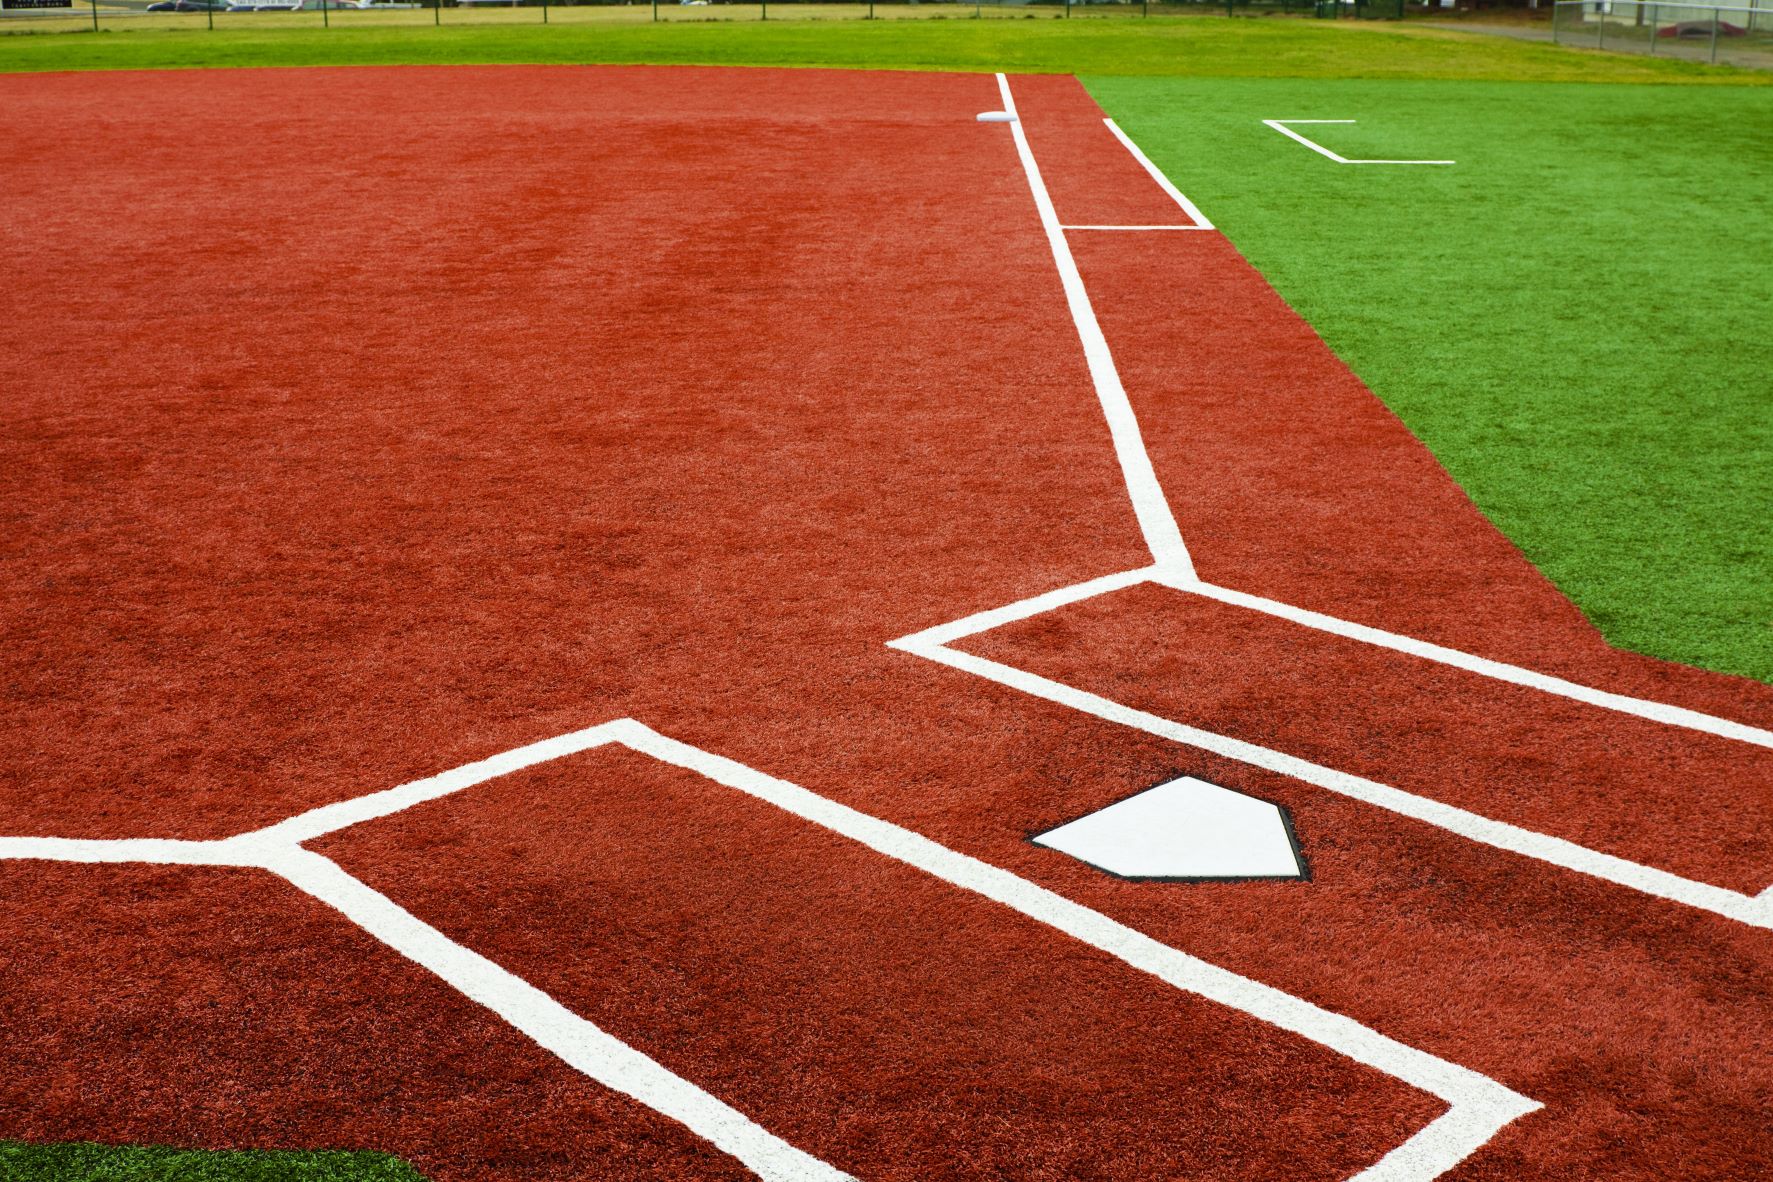 how much does it cost to build a baseball field